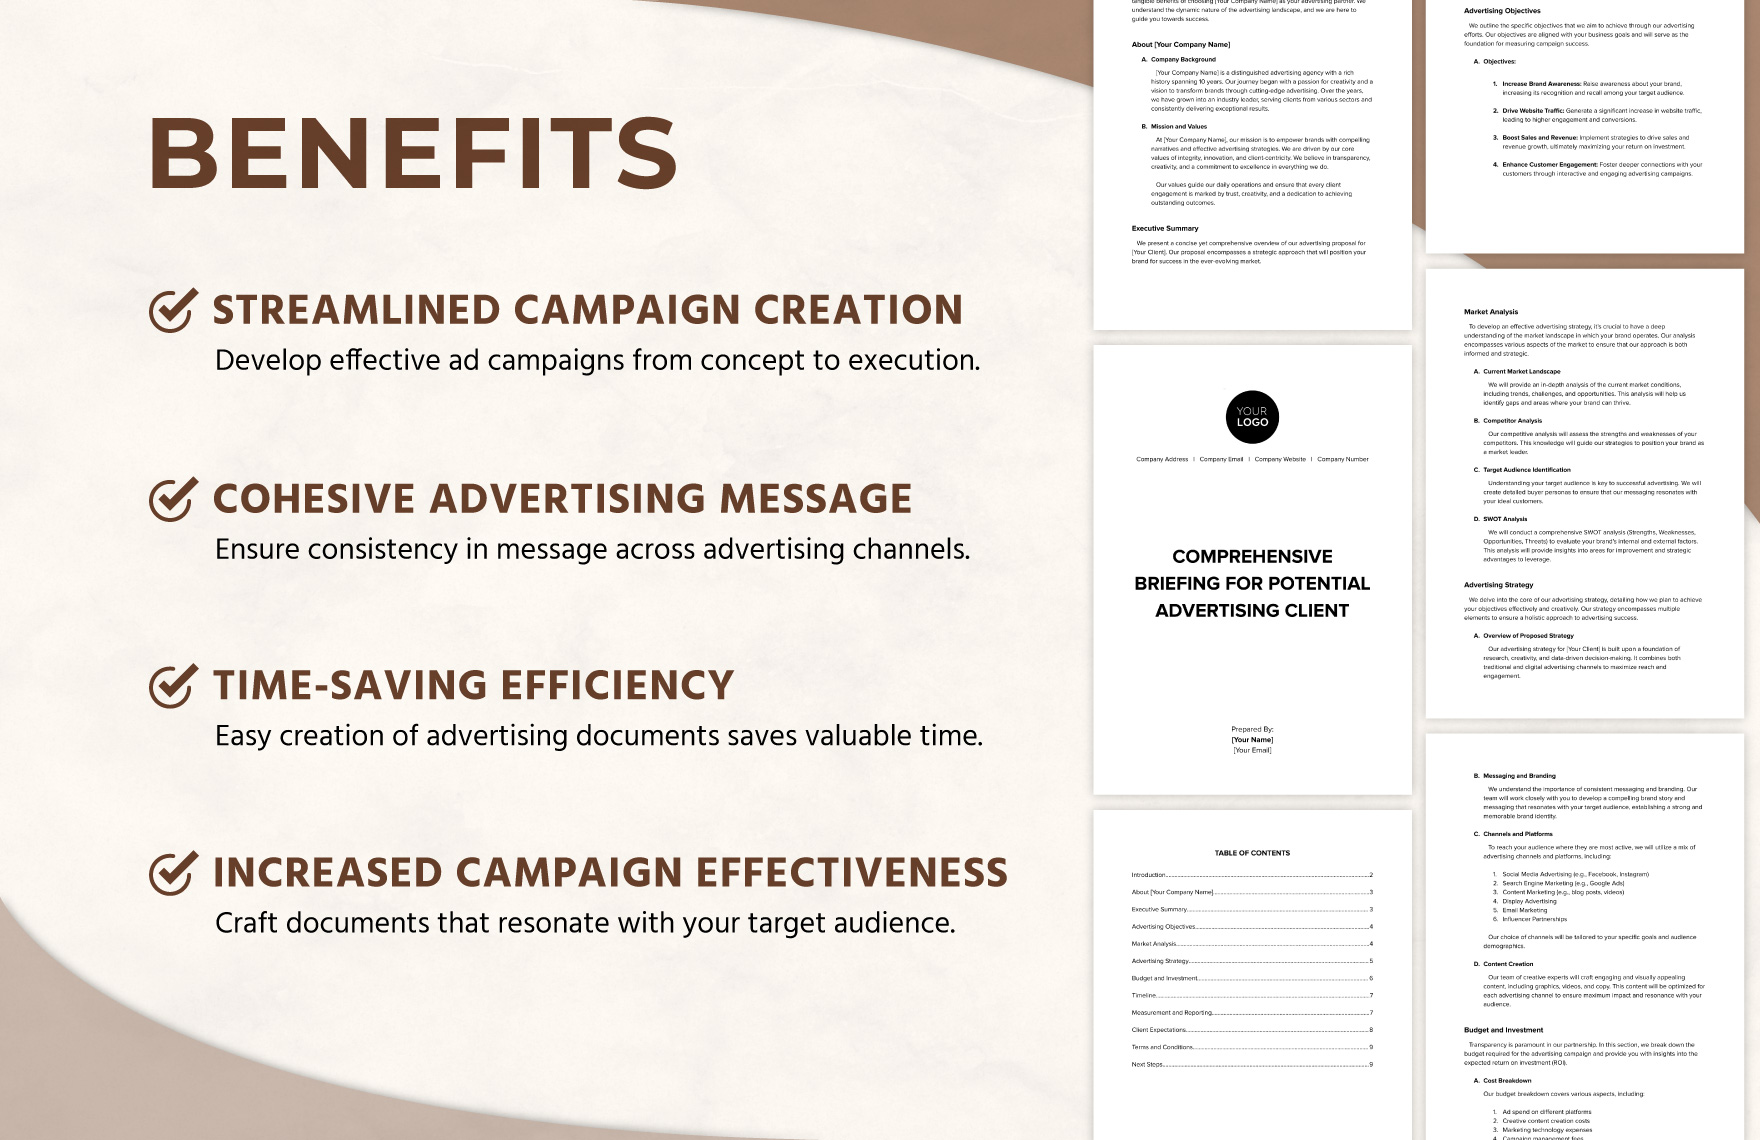 Comprehensive Briefing for Potential Advertising Client Template